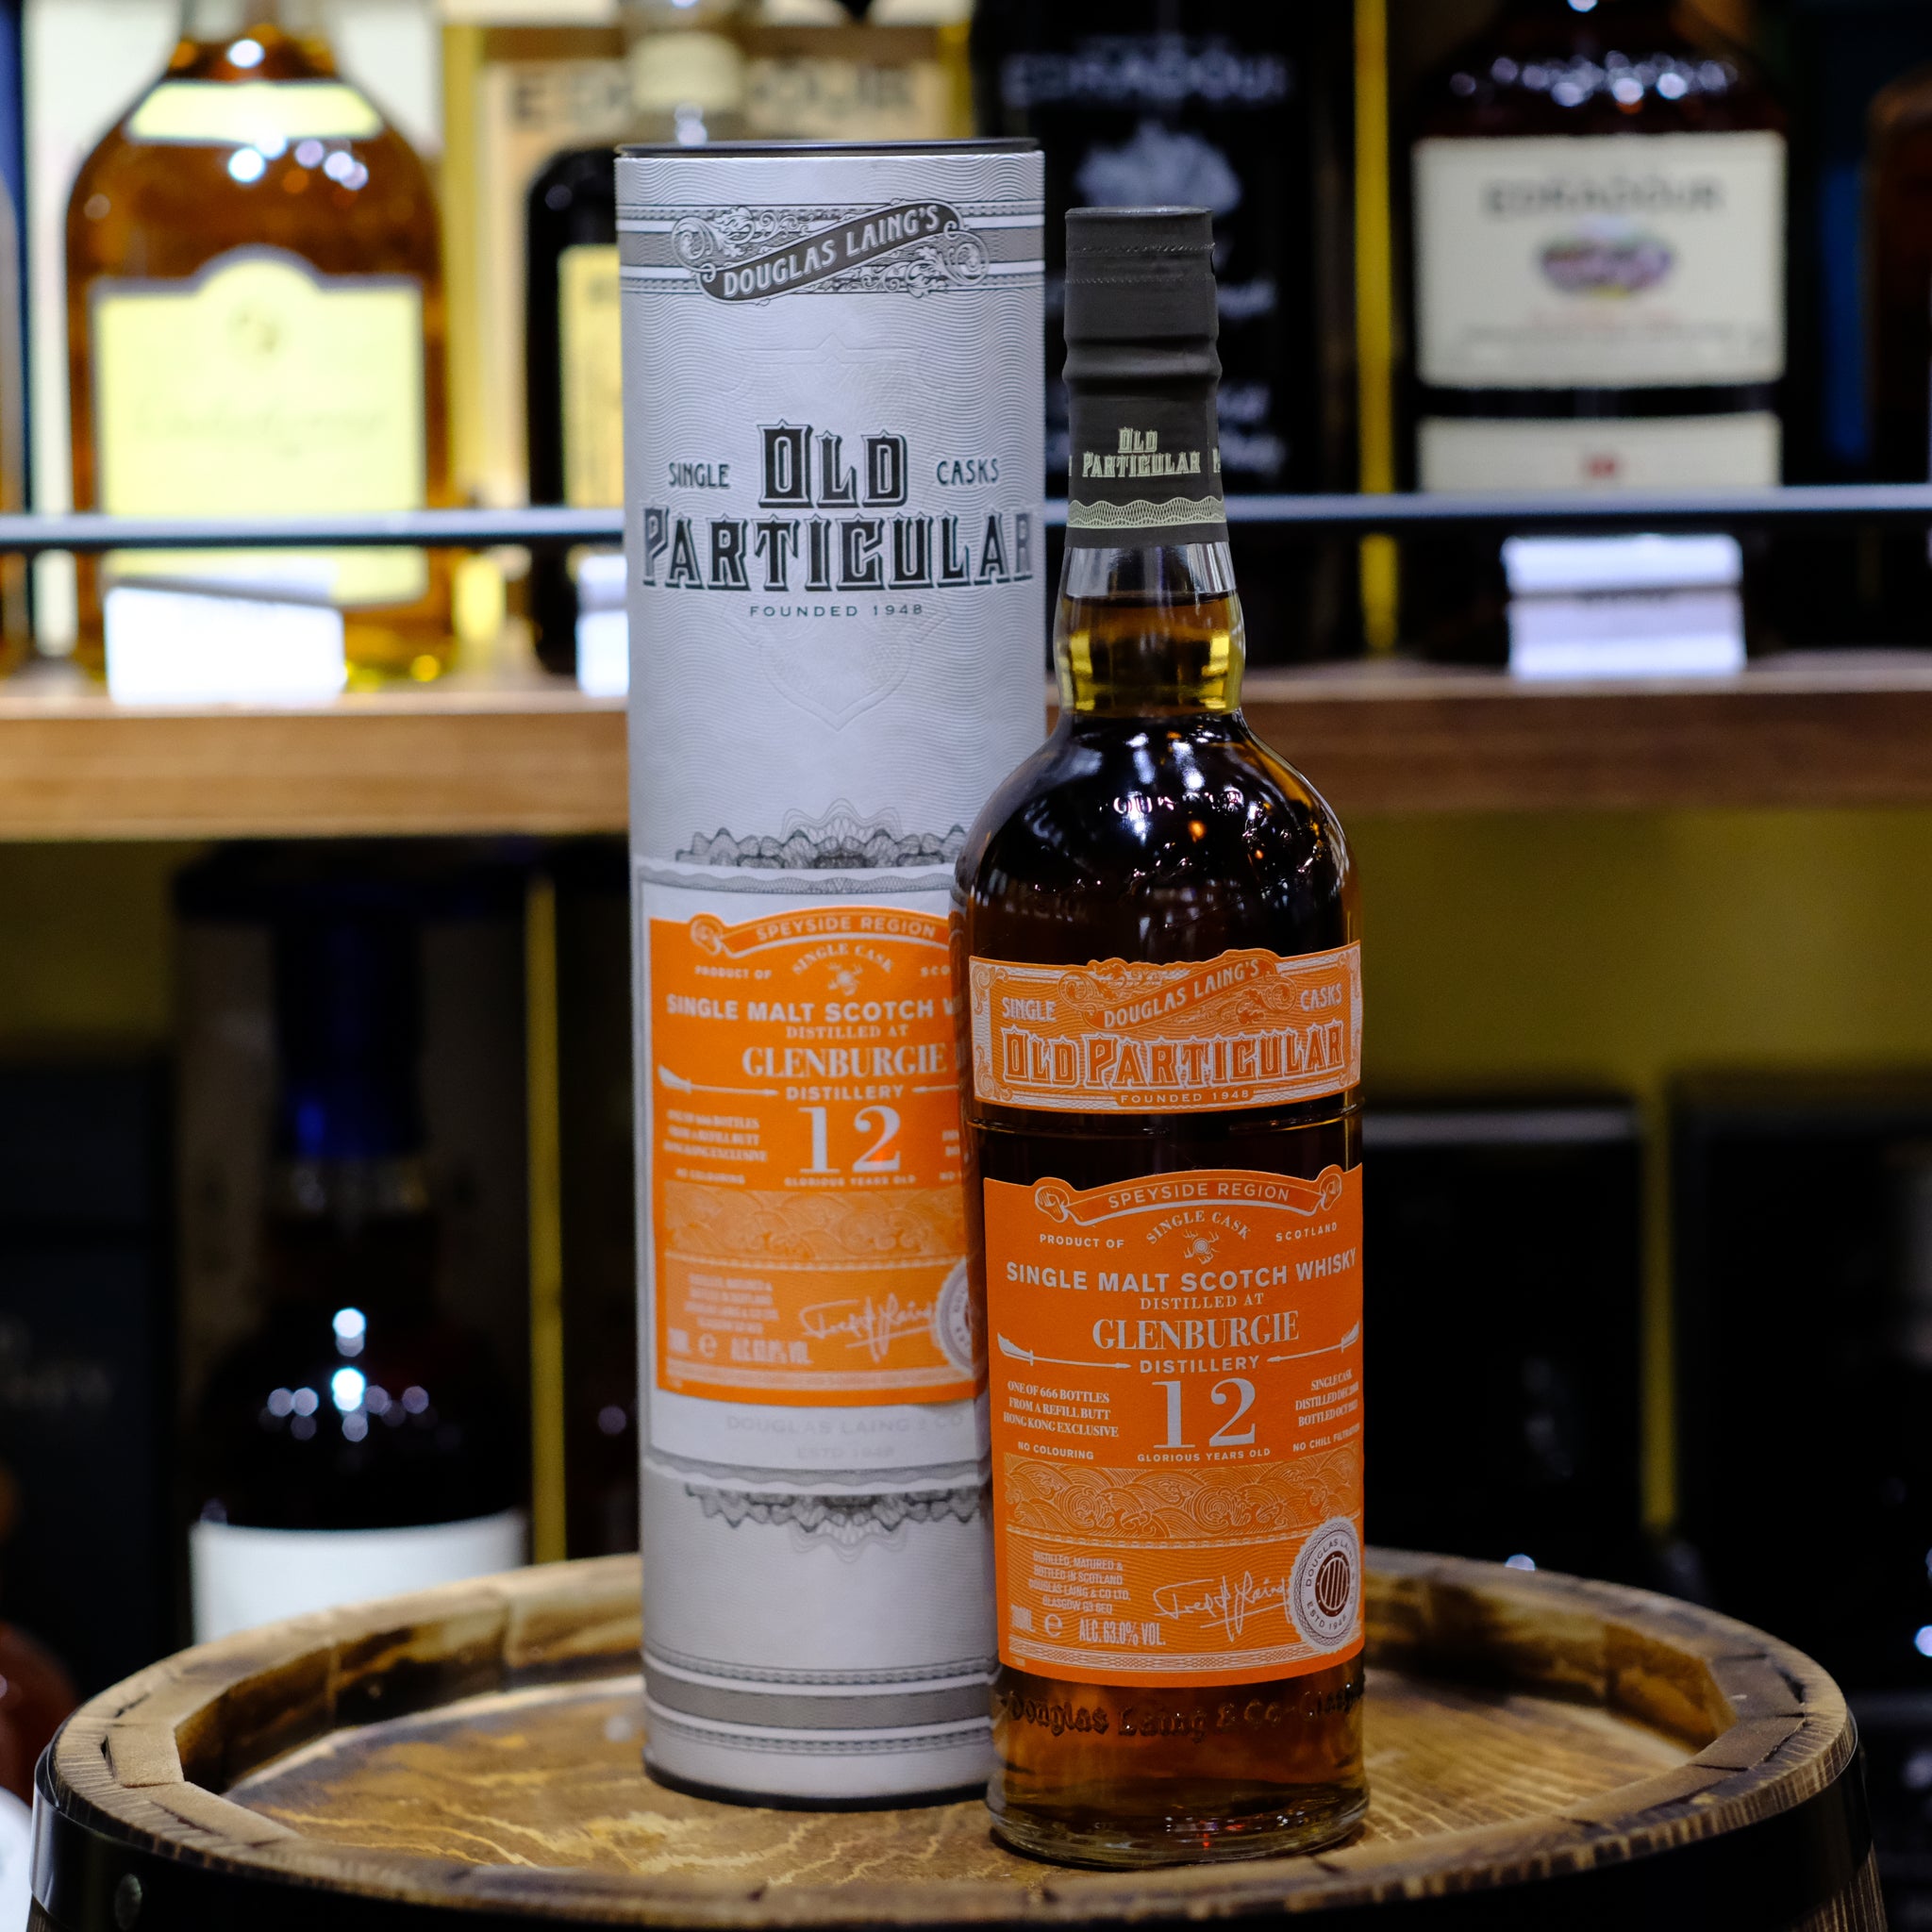 Glenburgie 12 Year Old by Douglas Laing's Old Particular Series Single Malt Scotch Whisky